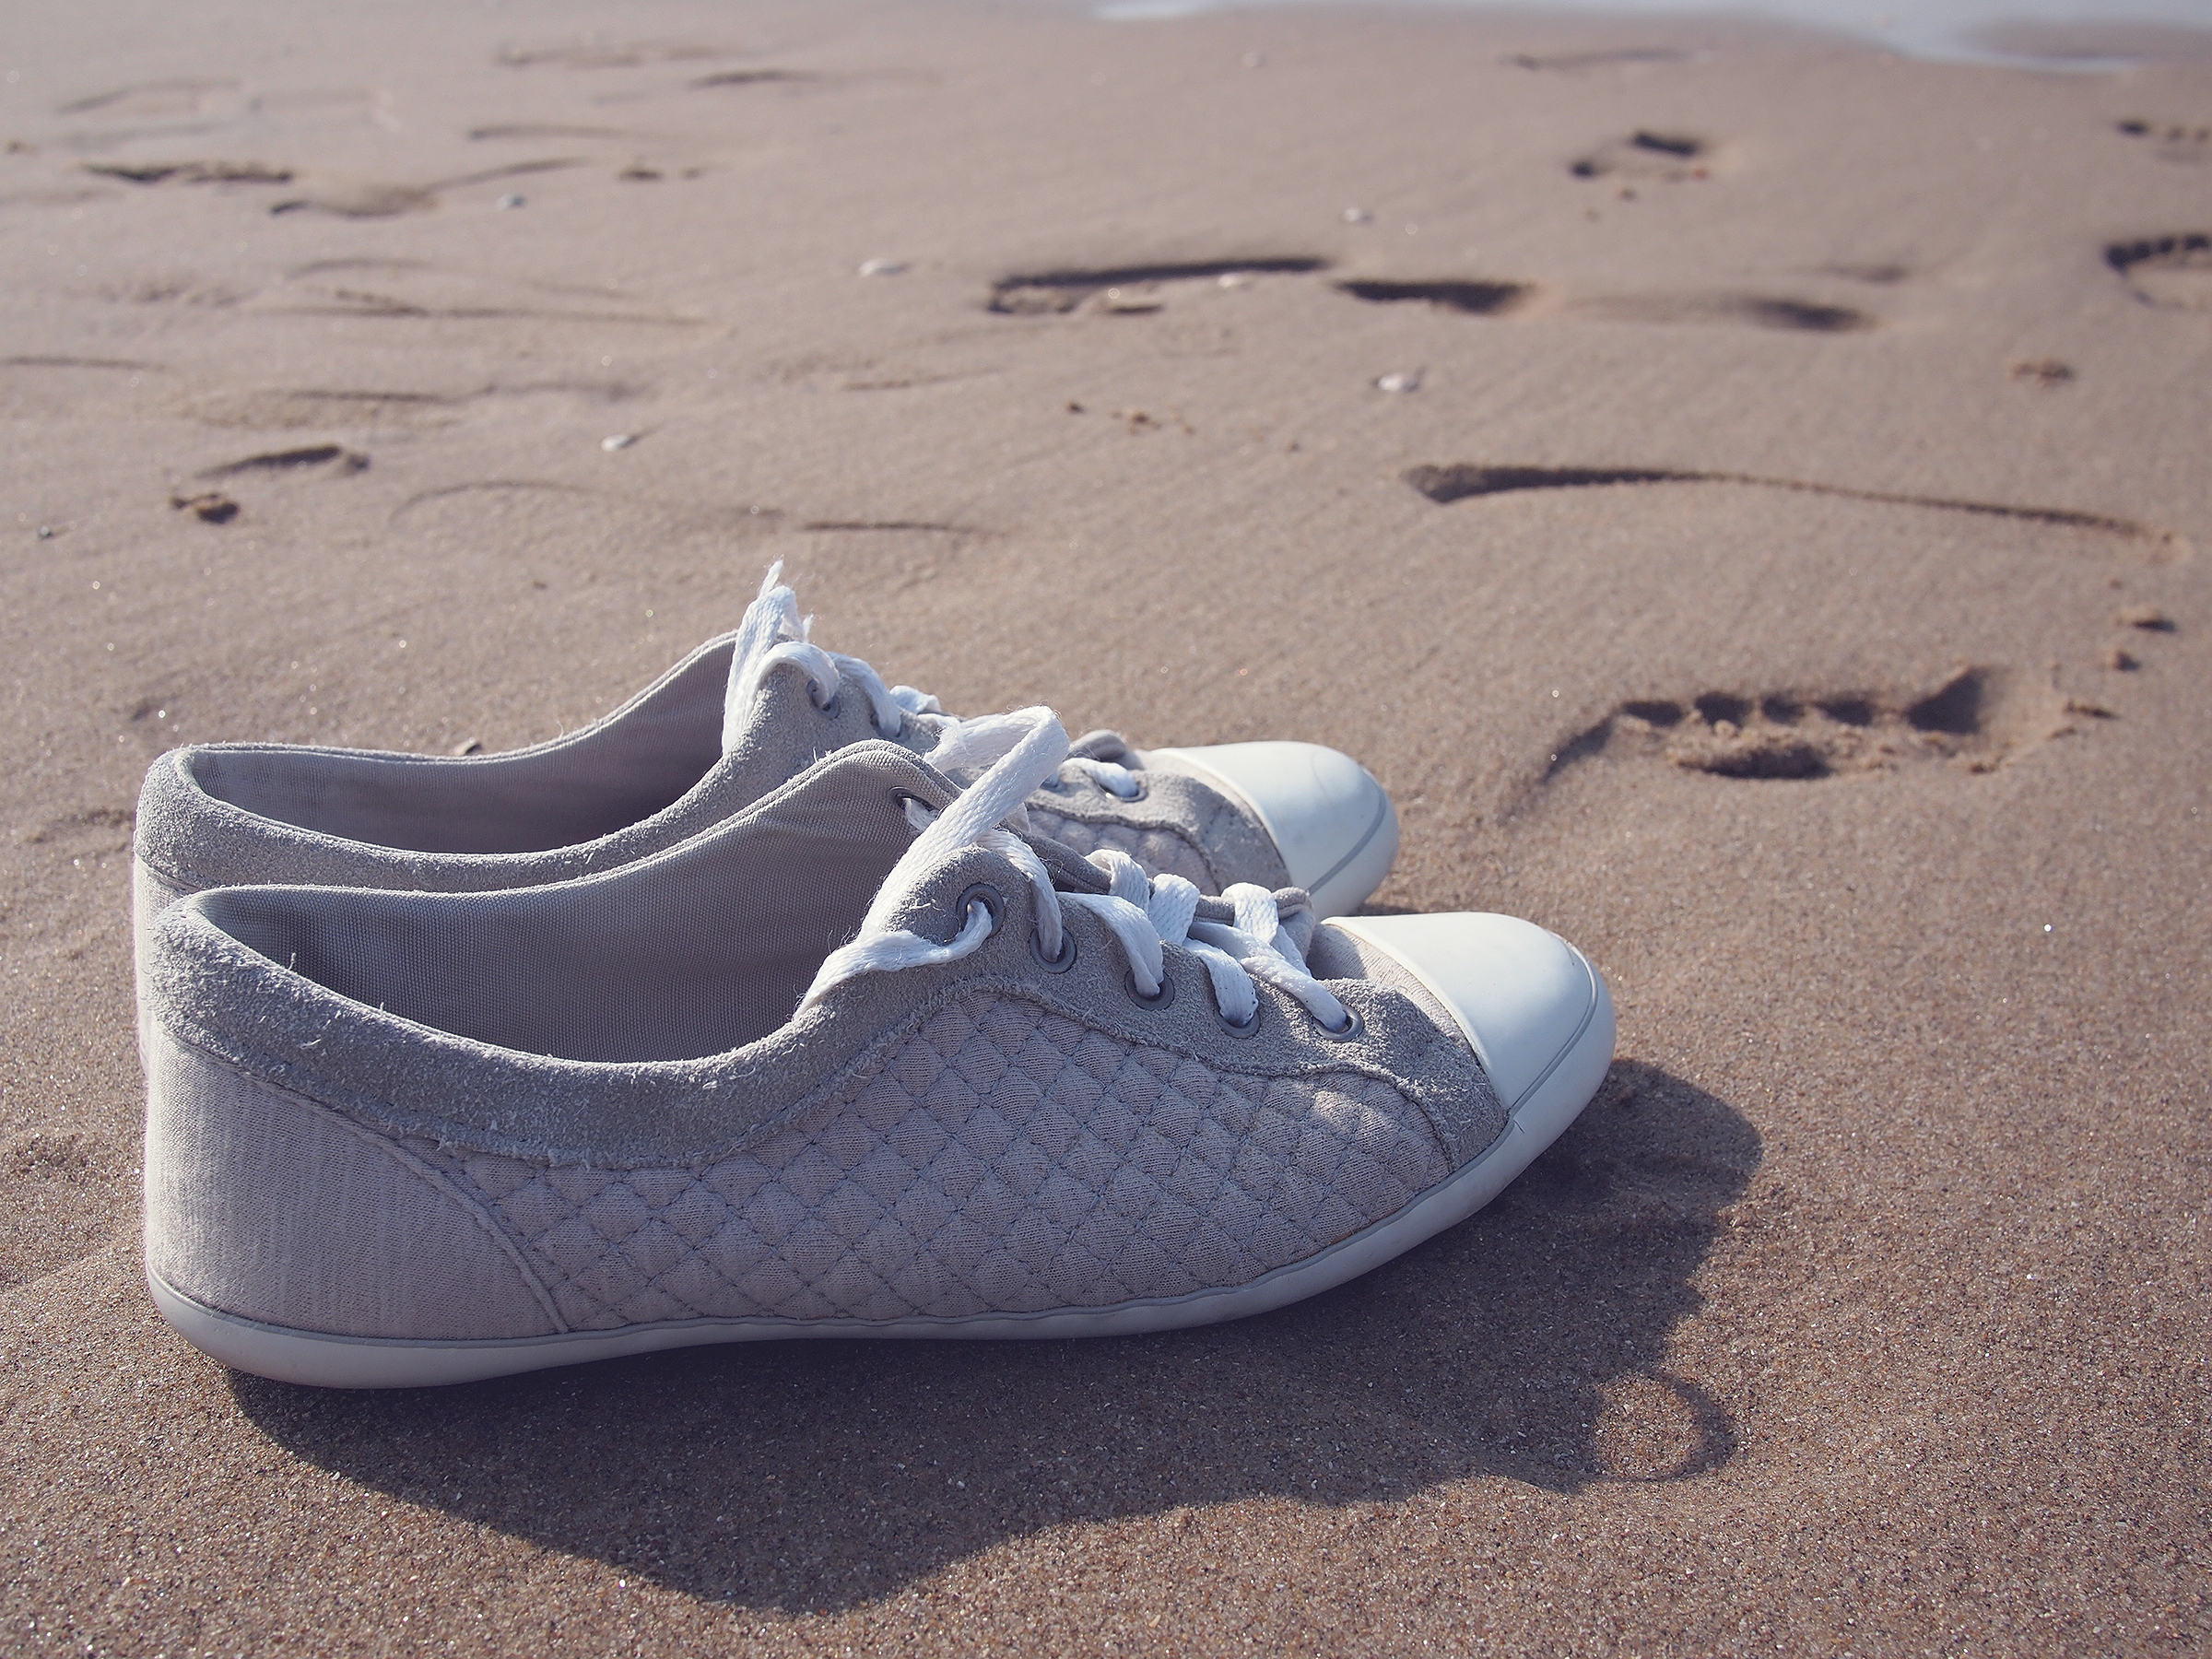 Shoes in Sand – shoes design